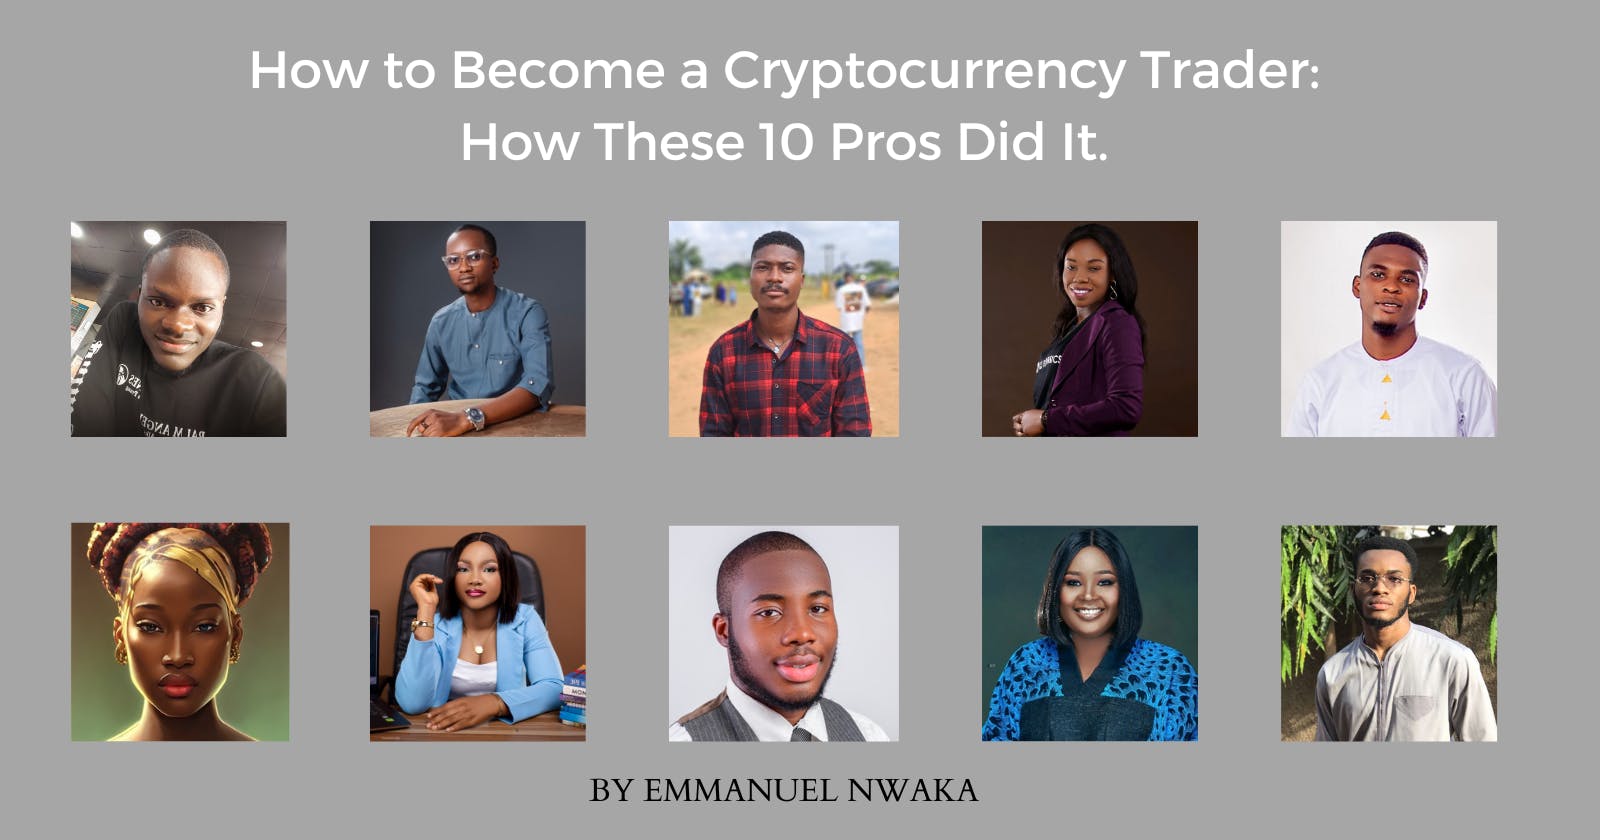 How to Become a Cryptocurrency Trader: How These 10 Pros Did It